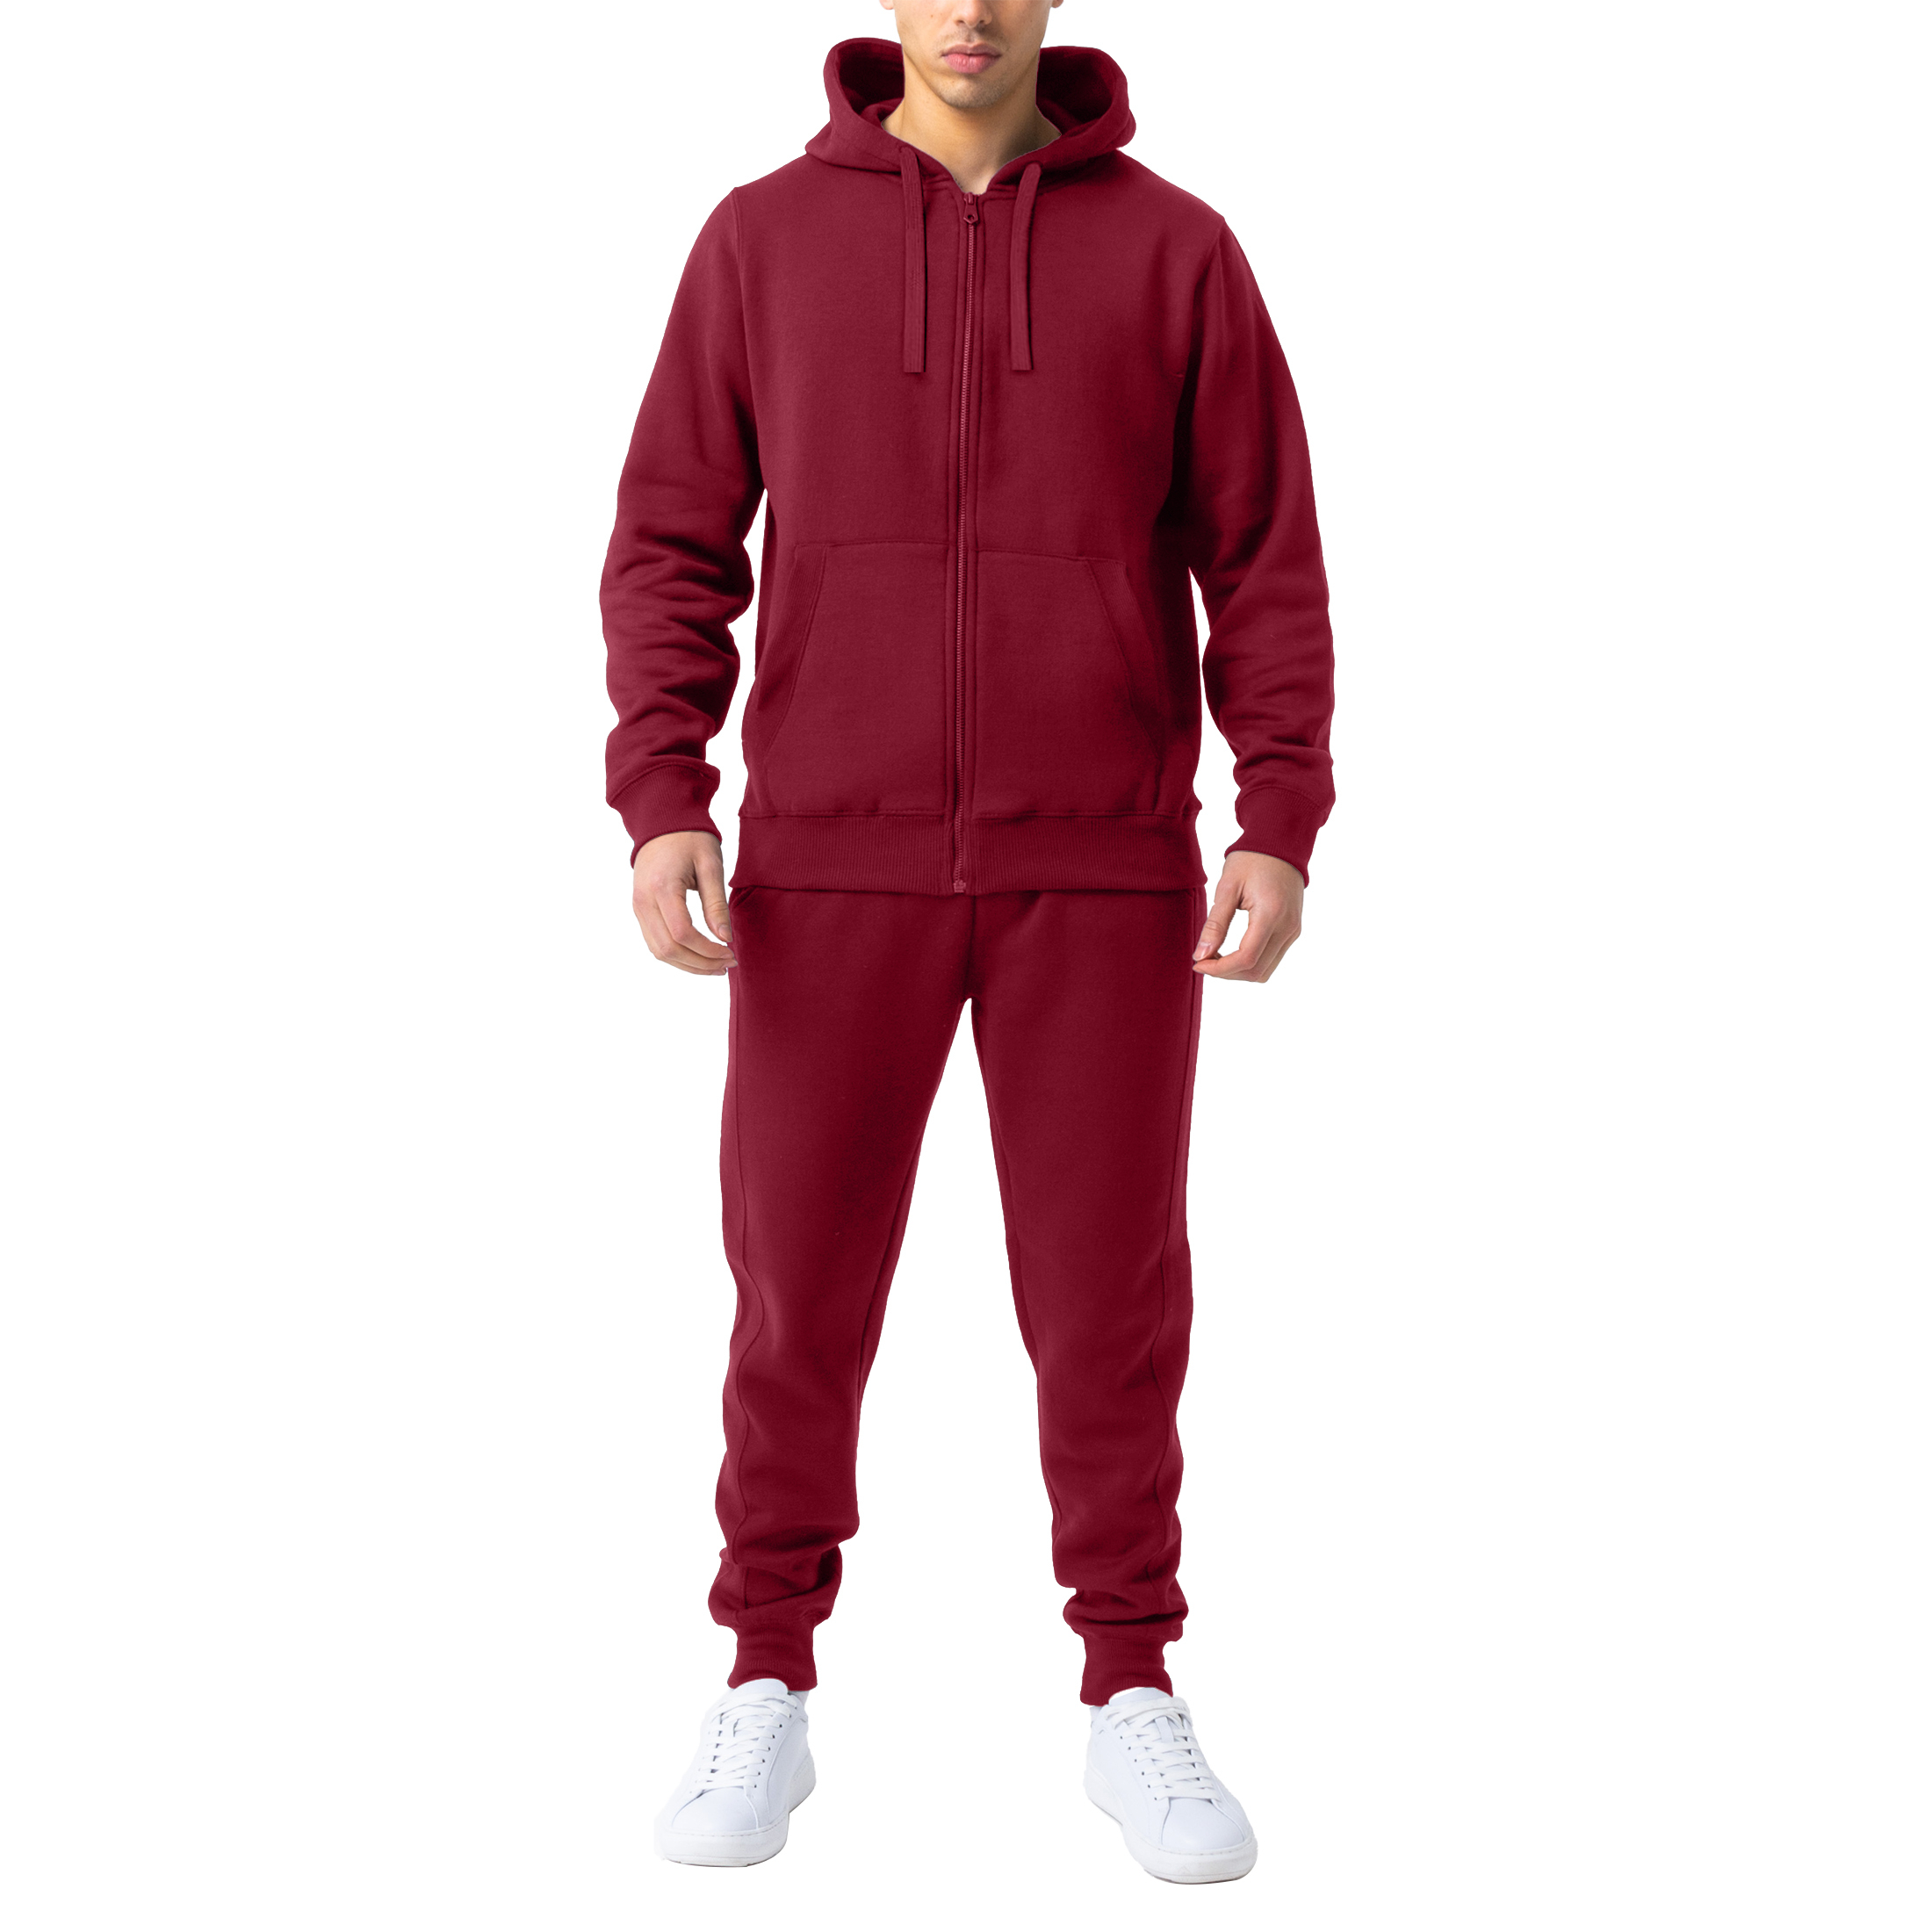 Men's Casual Jogging Athletic Active Full Zip Up Tracksuit - Red, Large